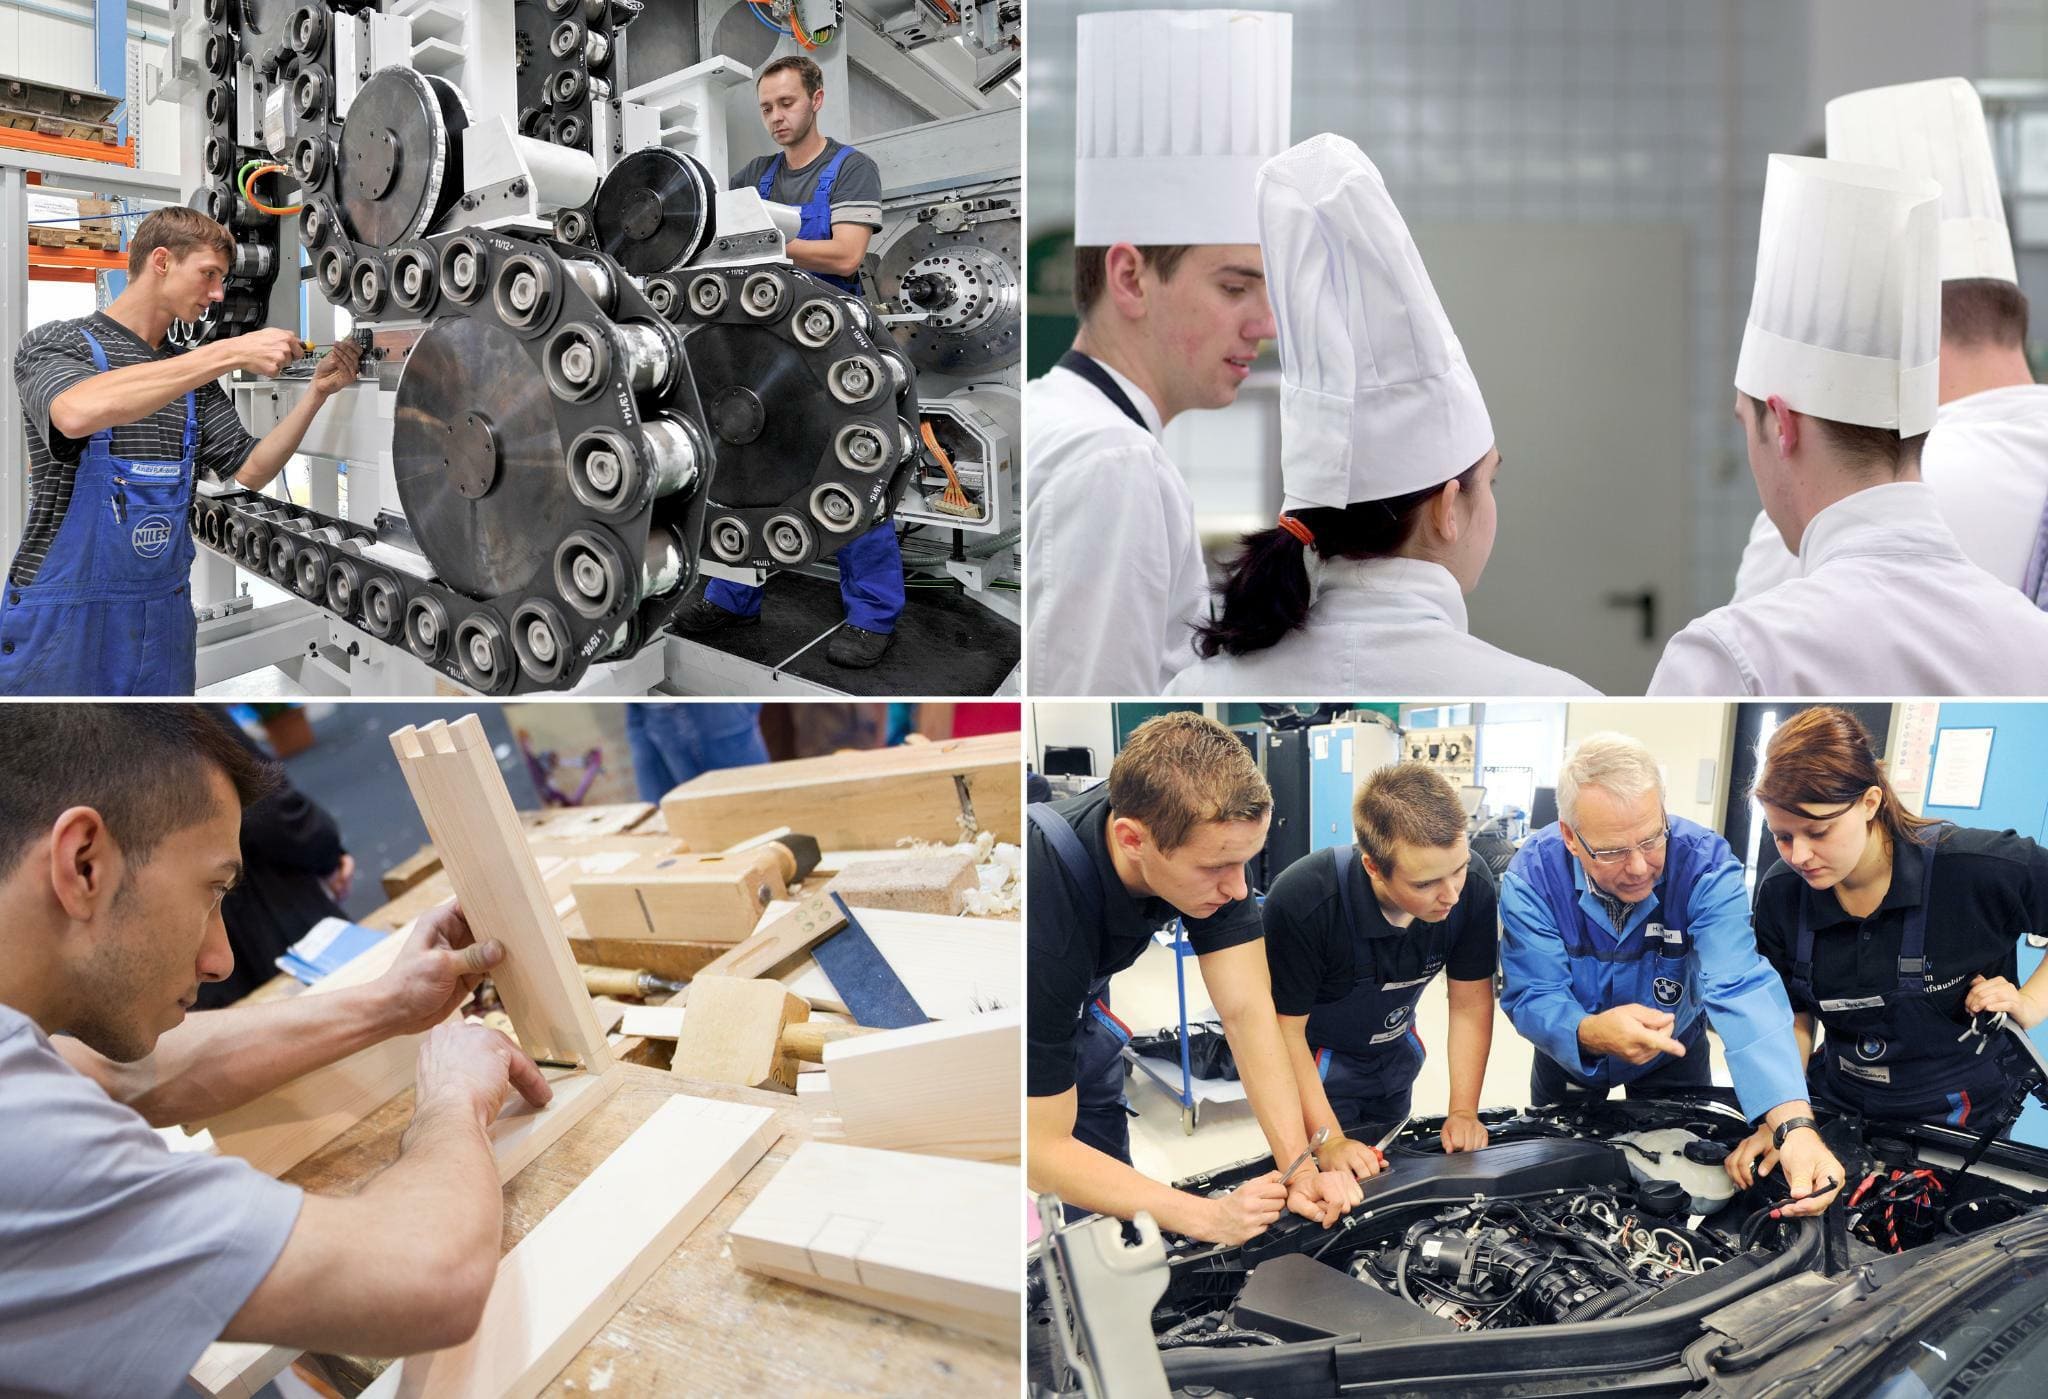 Practical vocational training in Germany